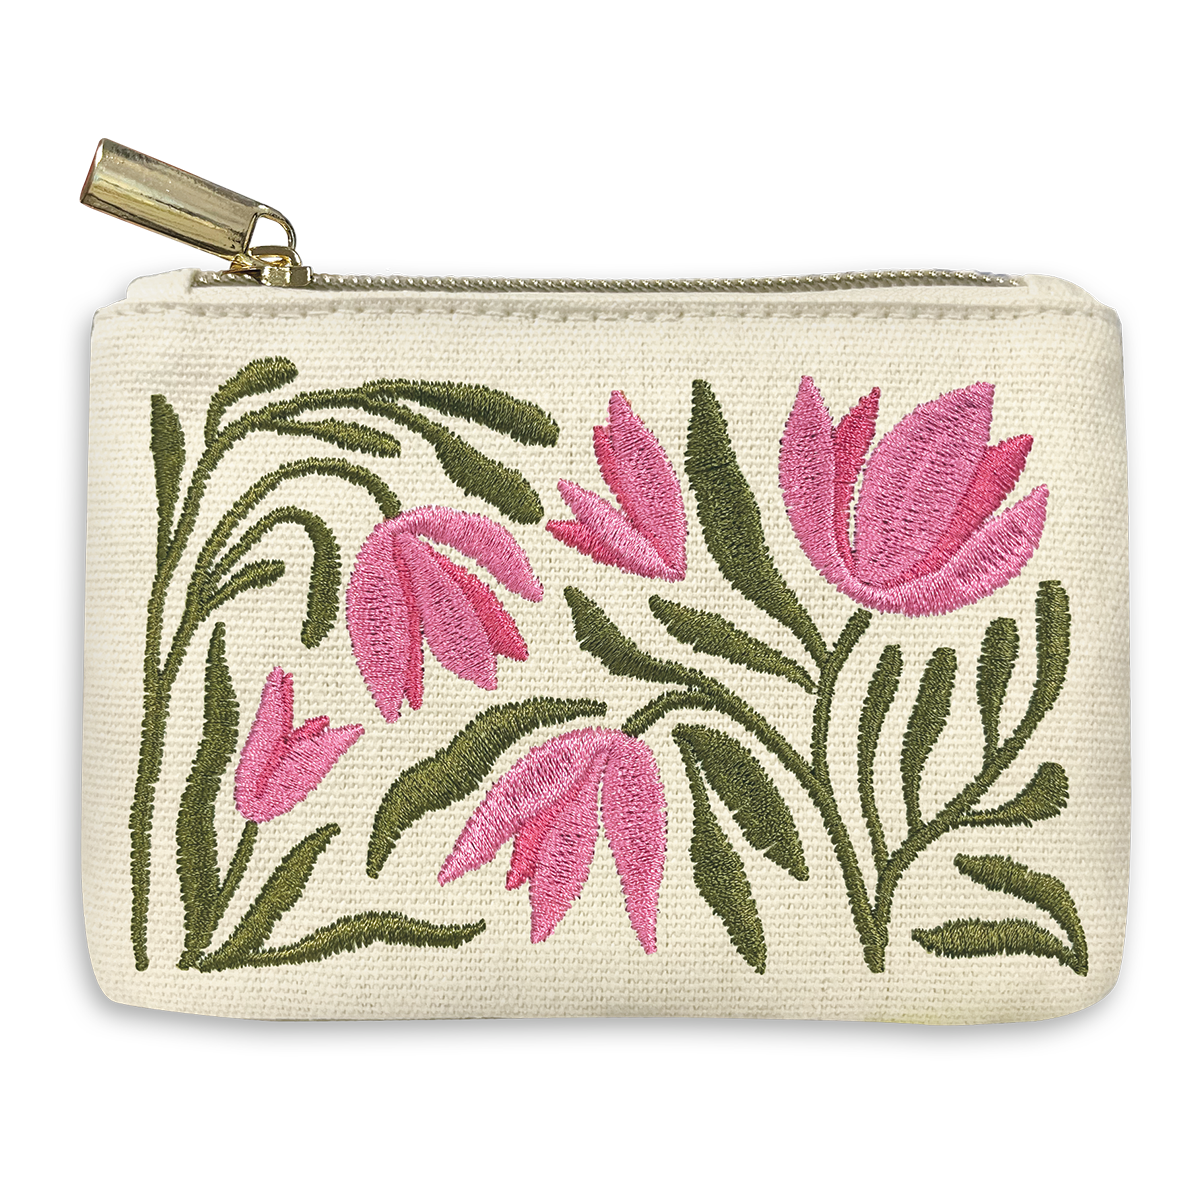 cream colored zipper bag embroidered with pink tulips.